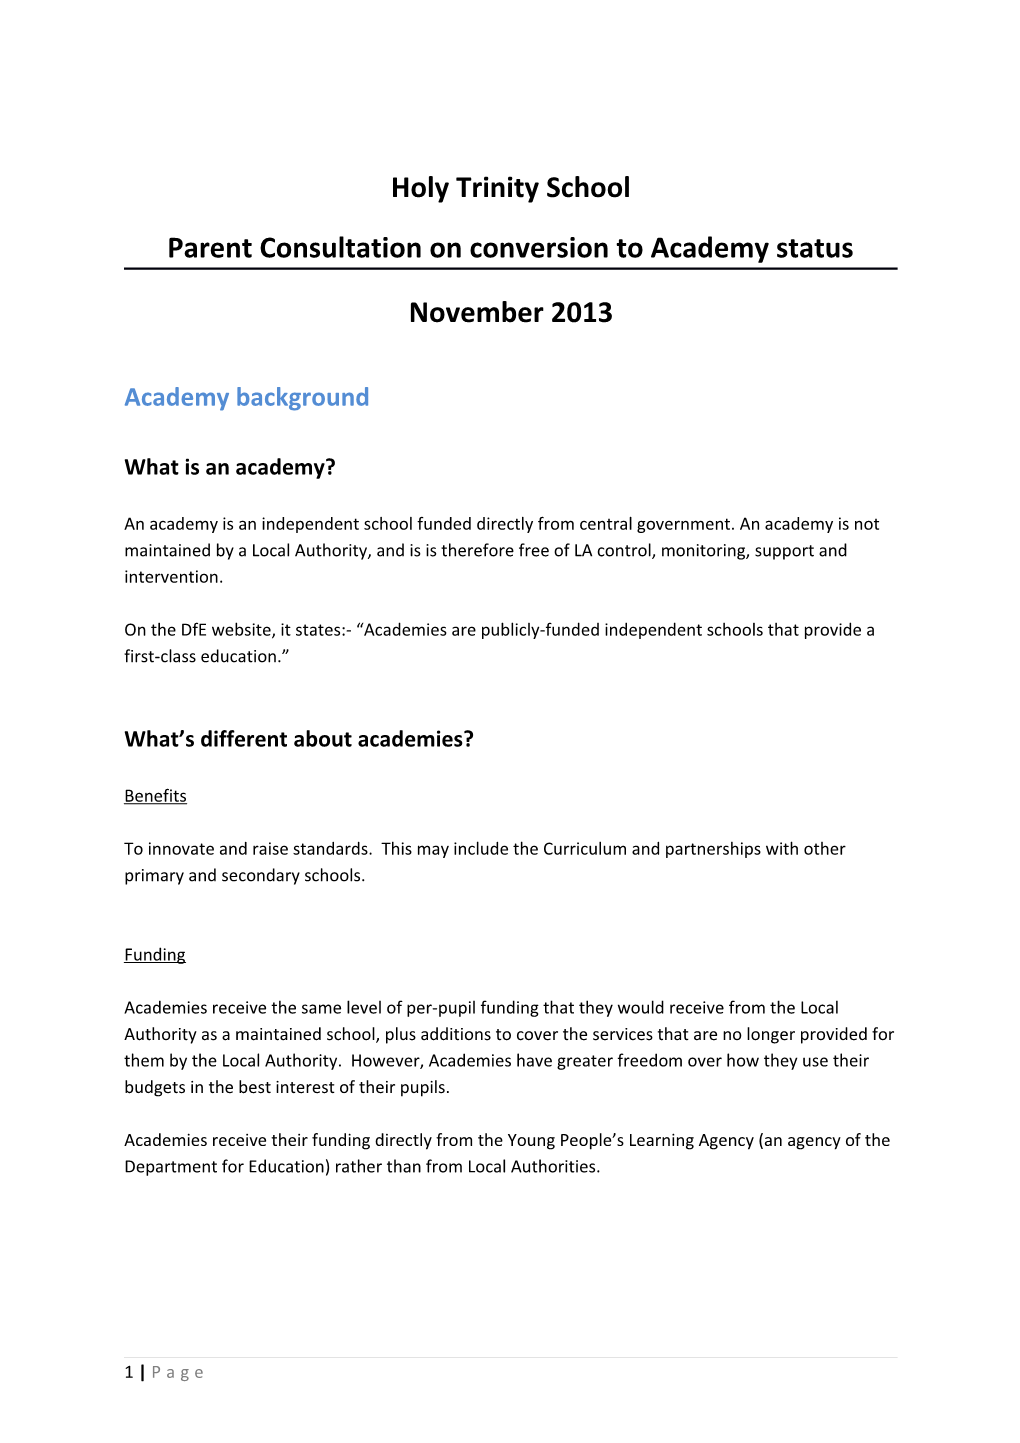 Parent Consultation on Conversion to Academy Status